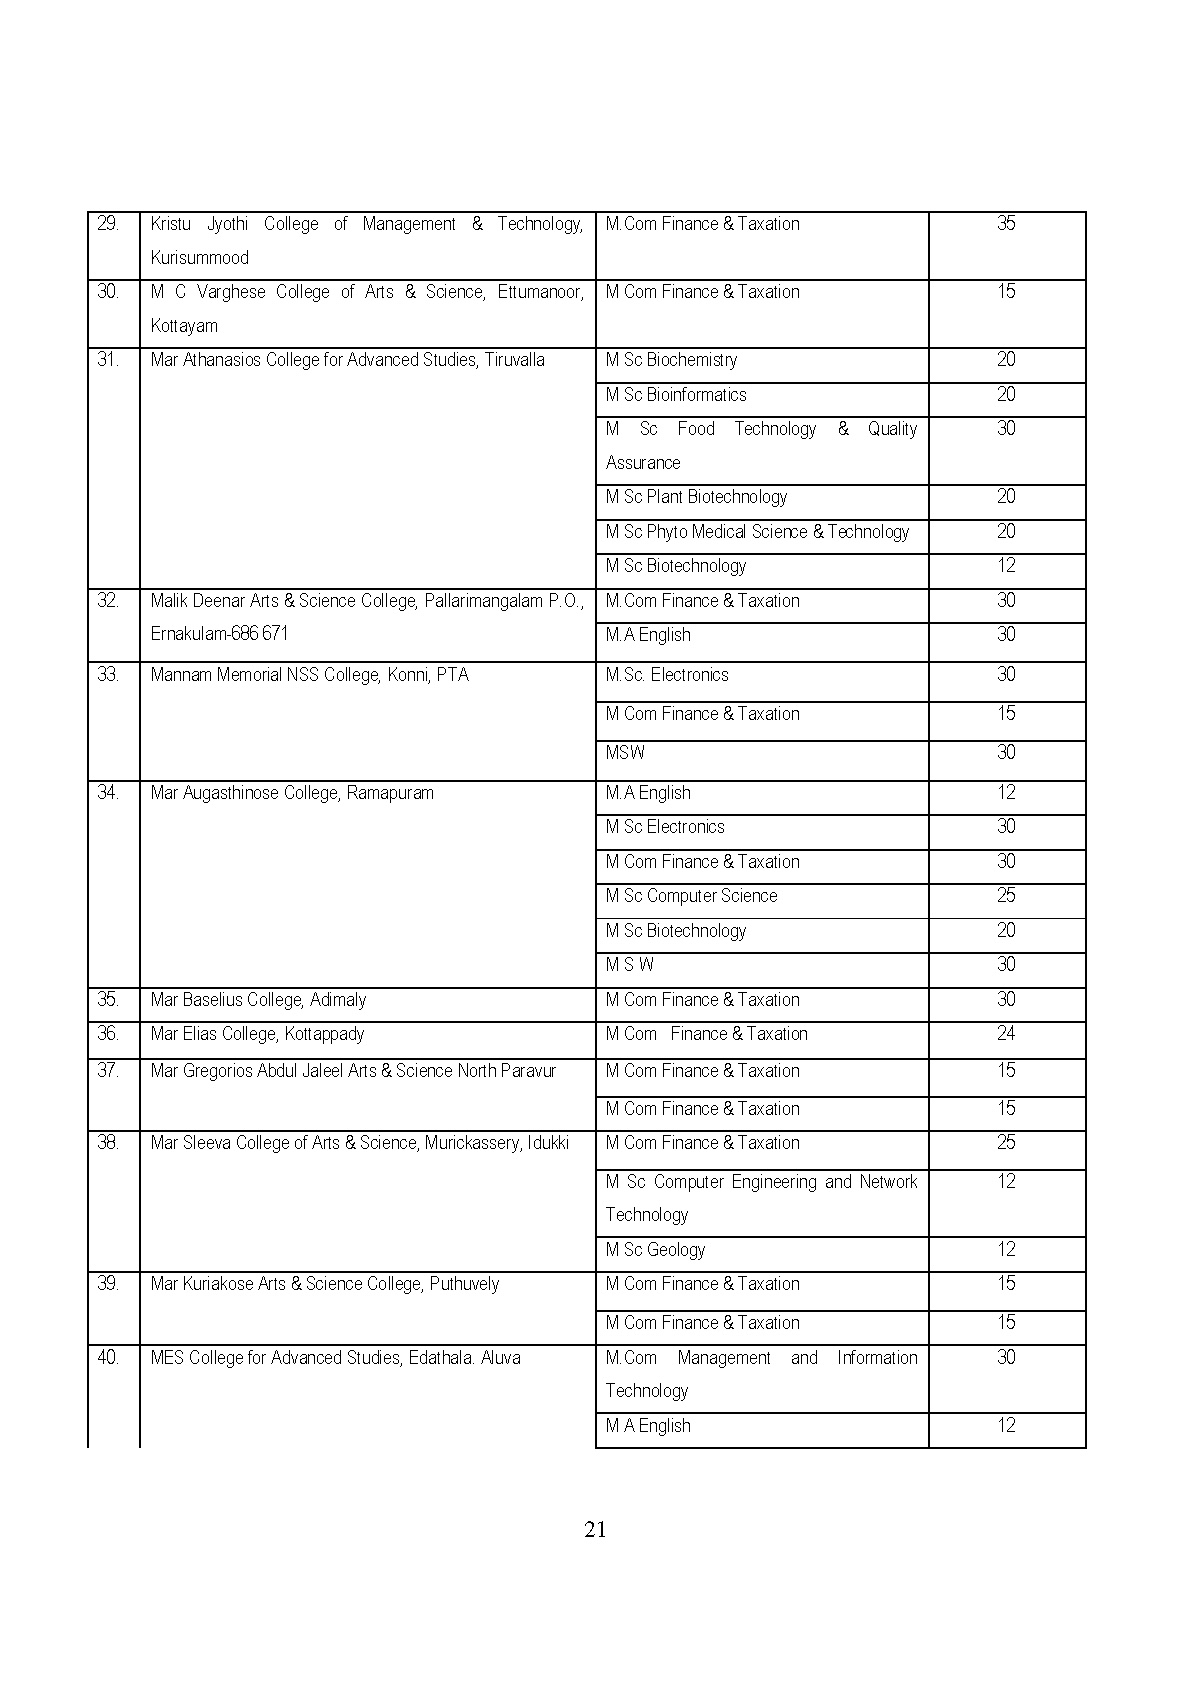 List of Unaided Arts and Science Colleges of MG University 2019 - Notification Image 4